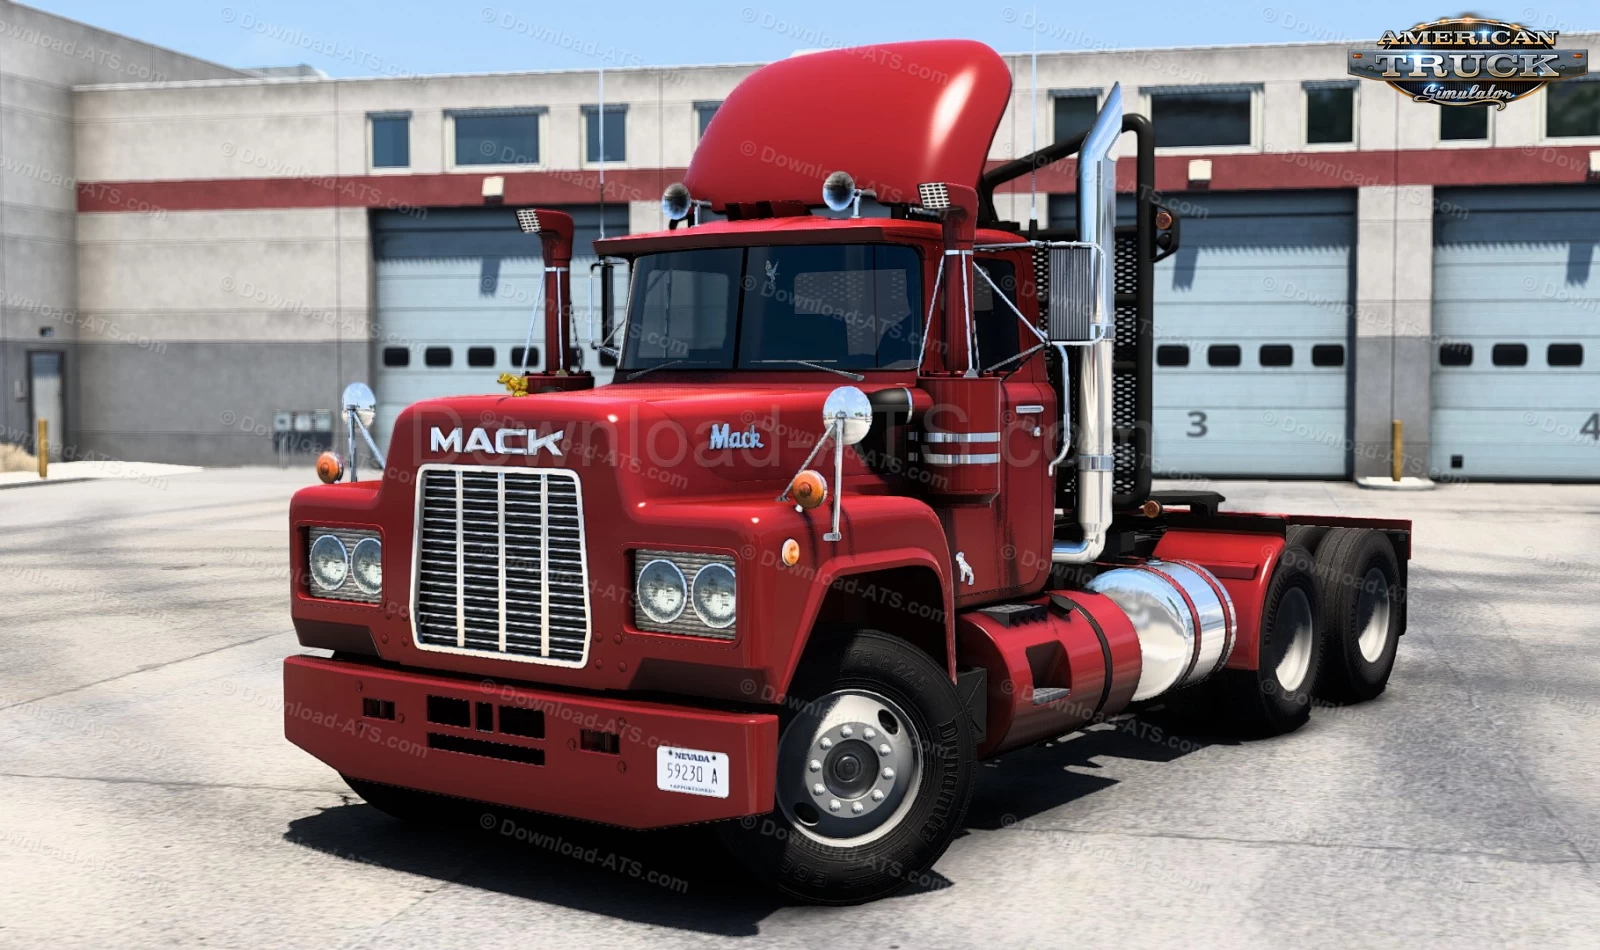 Mack R Series Truck v2.4 by Harven (1.46.x) for ATS